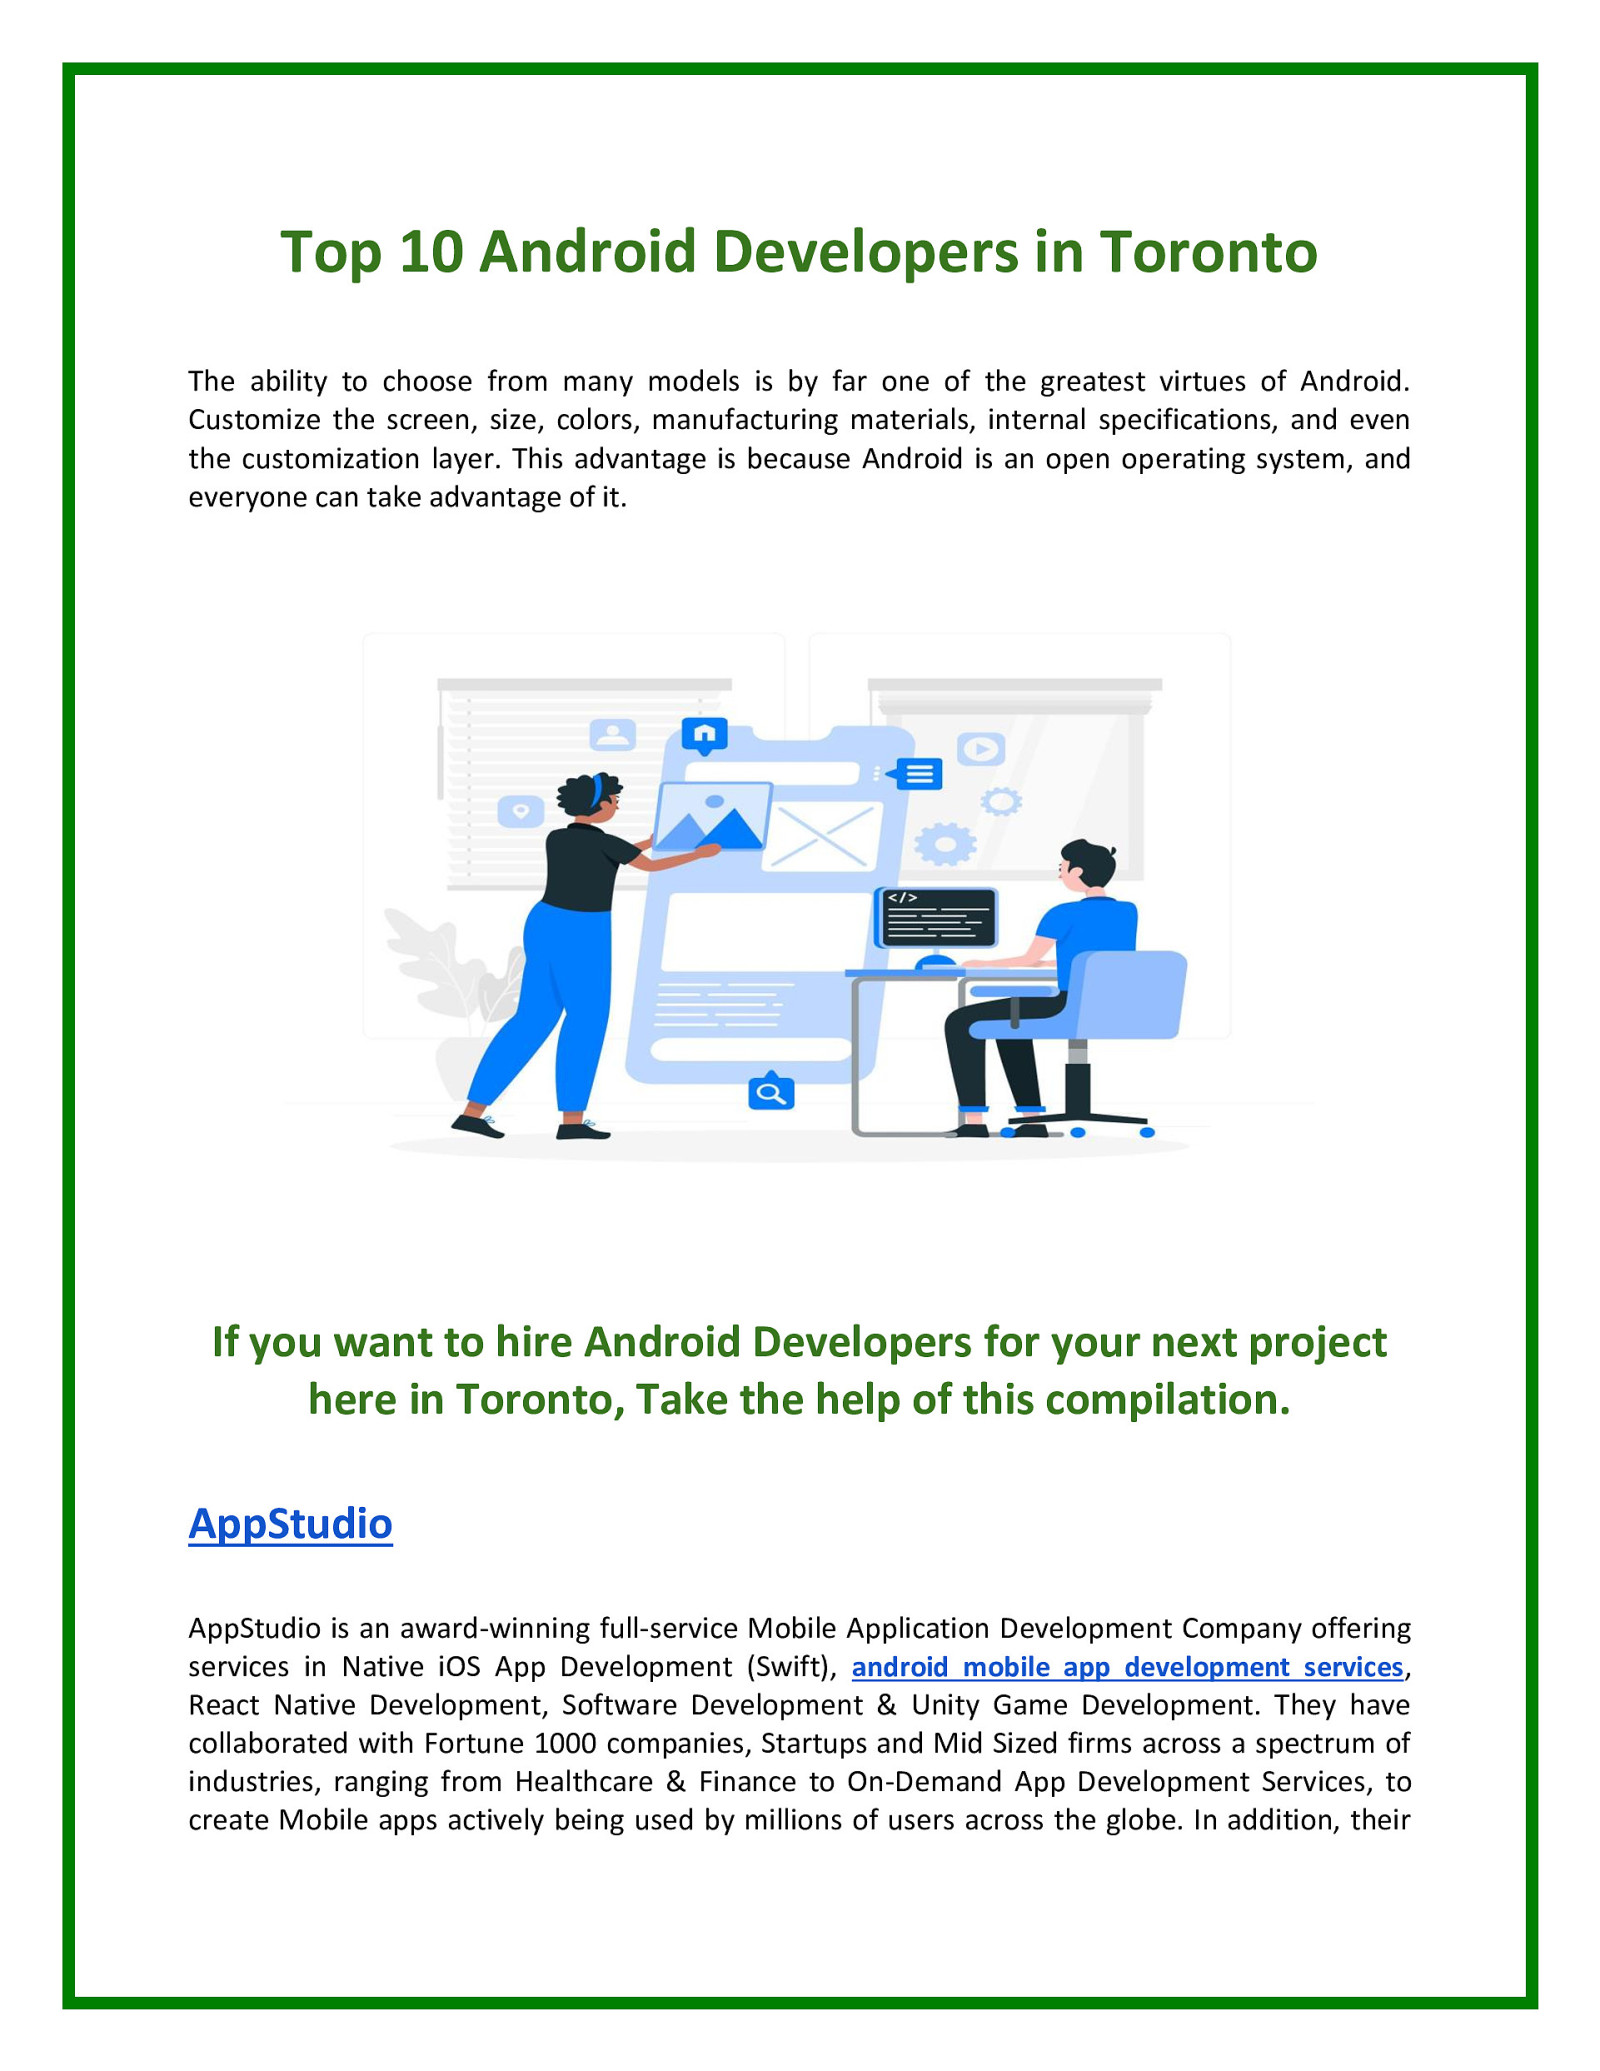 Top Android App Developers in Toronto